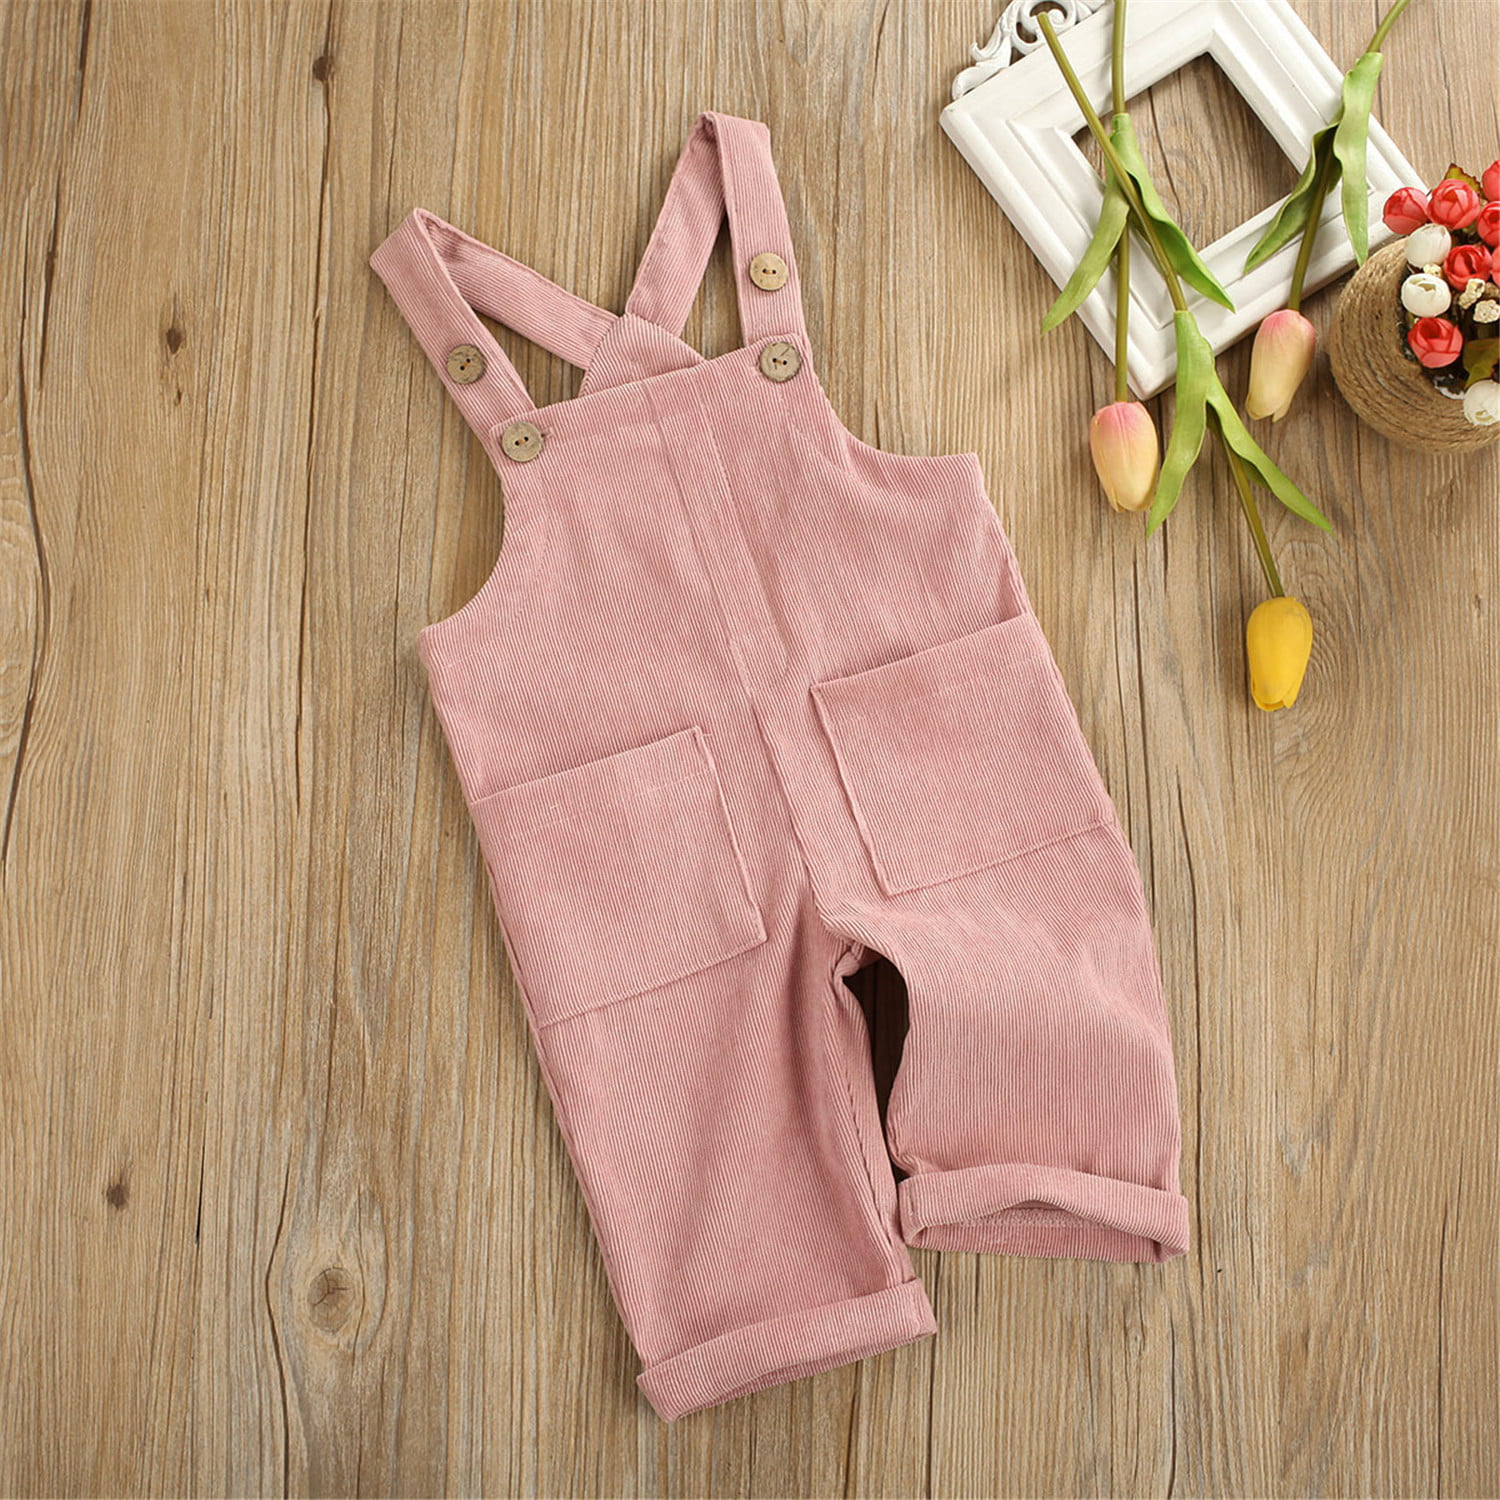 ITFABS Toddler Baby Boy Girl Overalls Corduroy Suspender Pants Outfits Solid One Piece Romper Jumpsuits Kids Clothes 